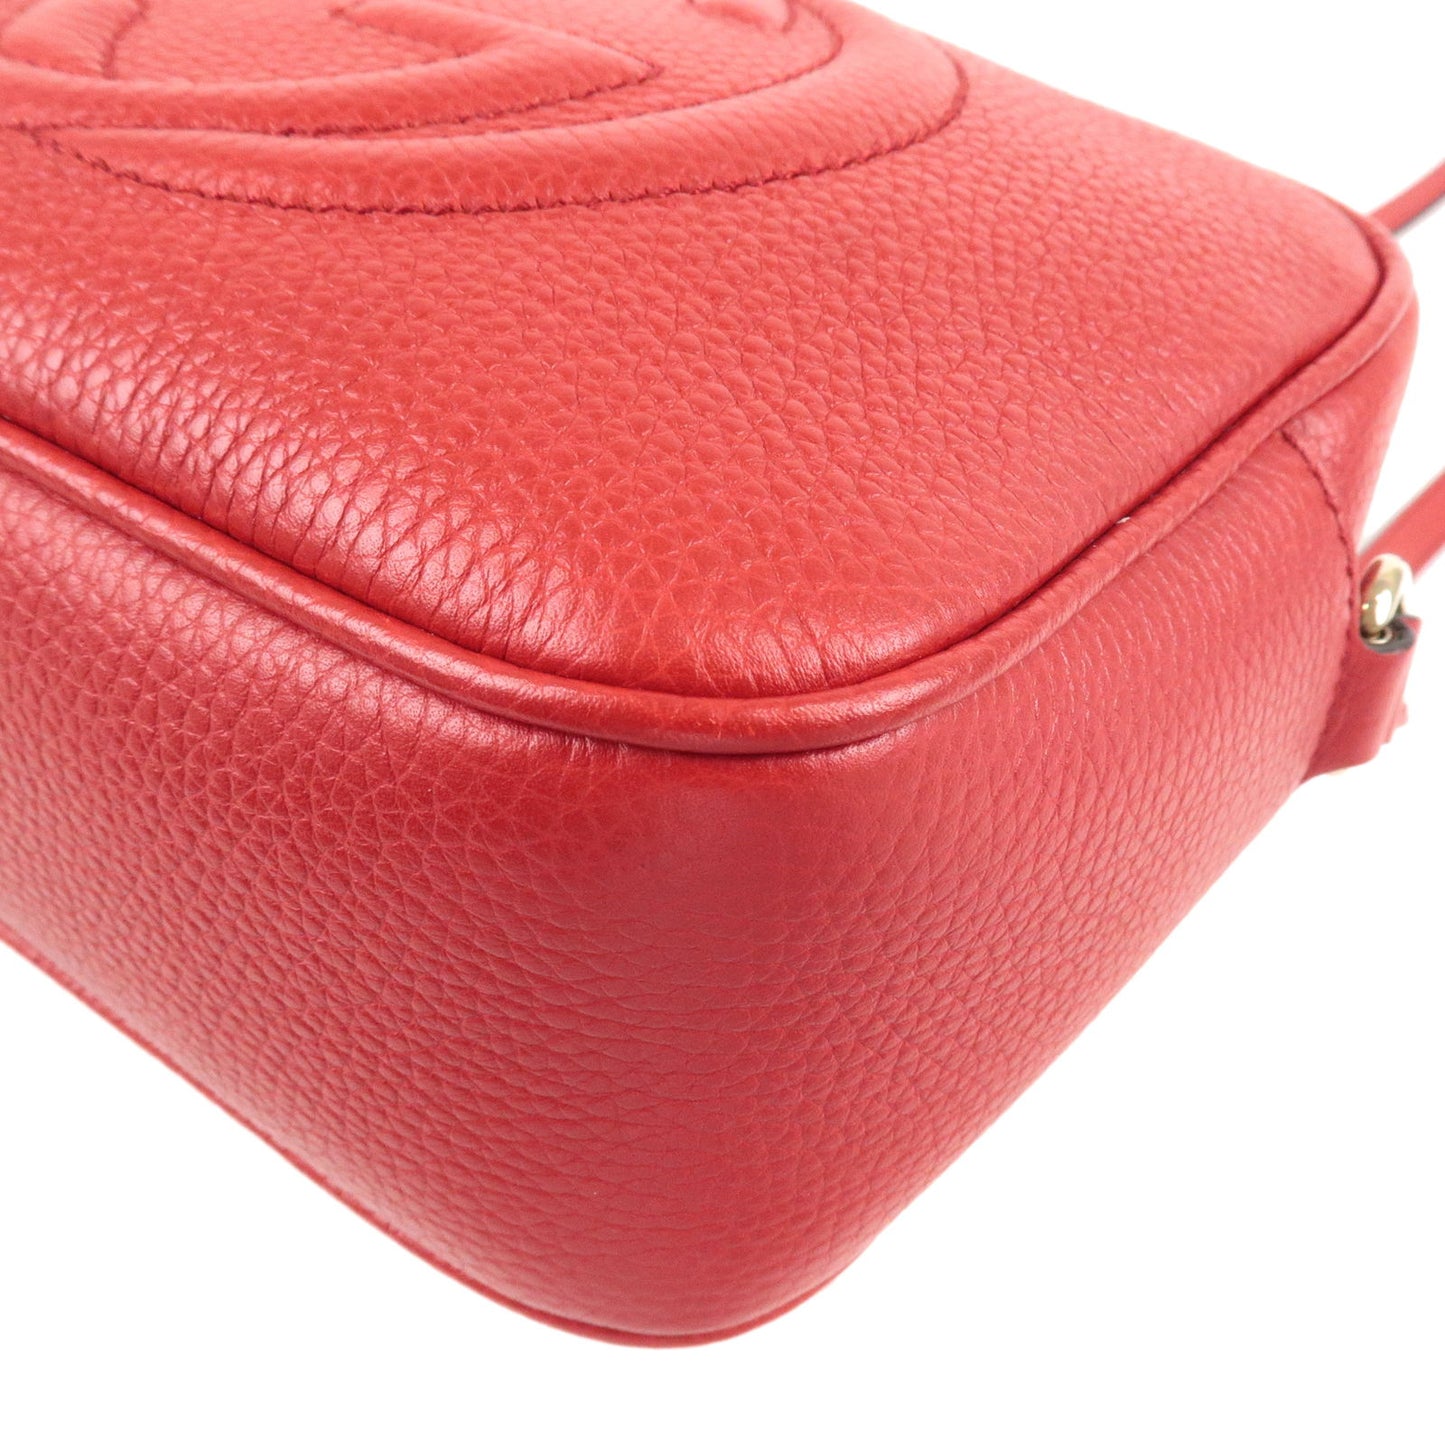 GUCCI SOHO Leather Small Disco Shoulder Bag Red 308364